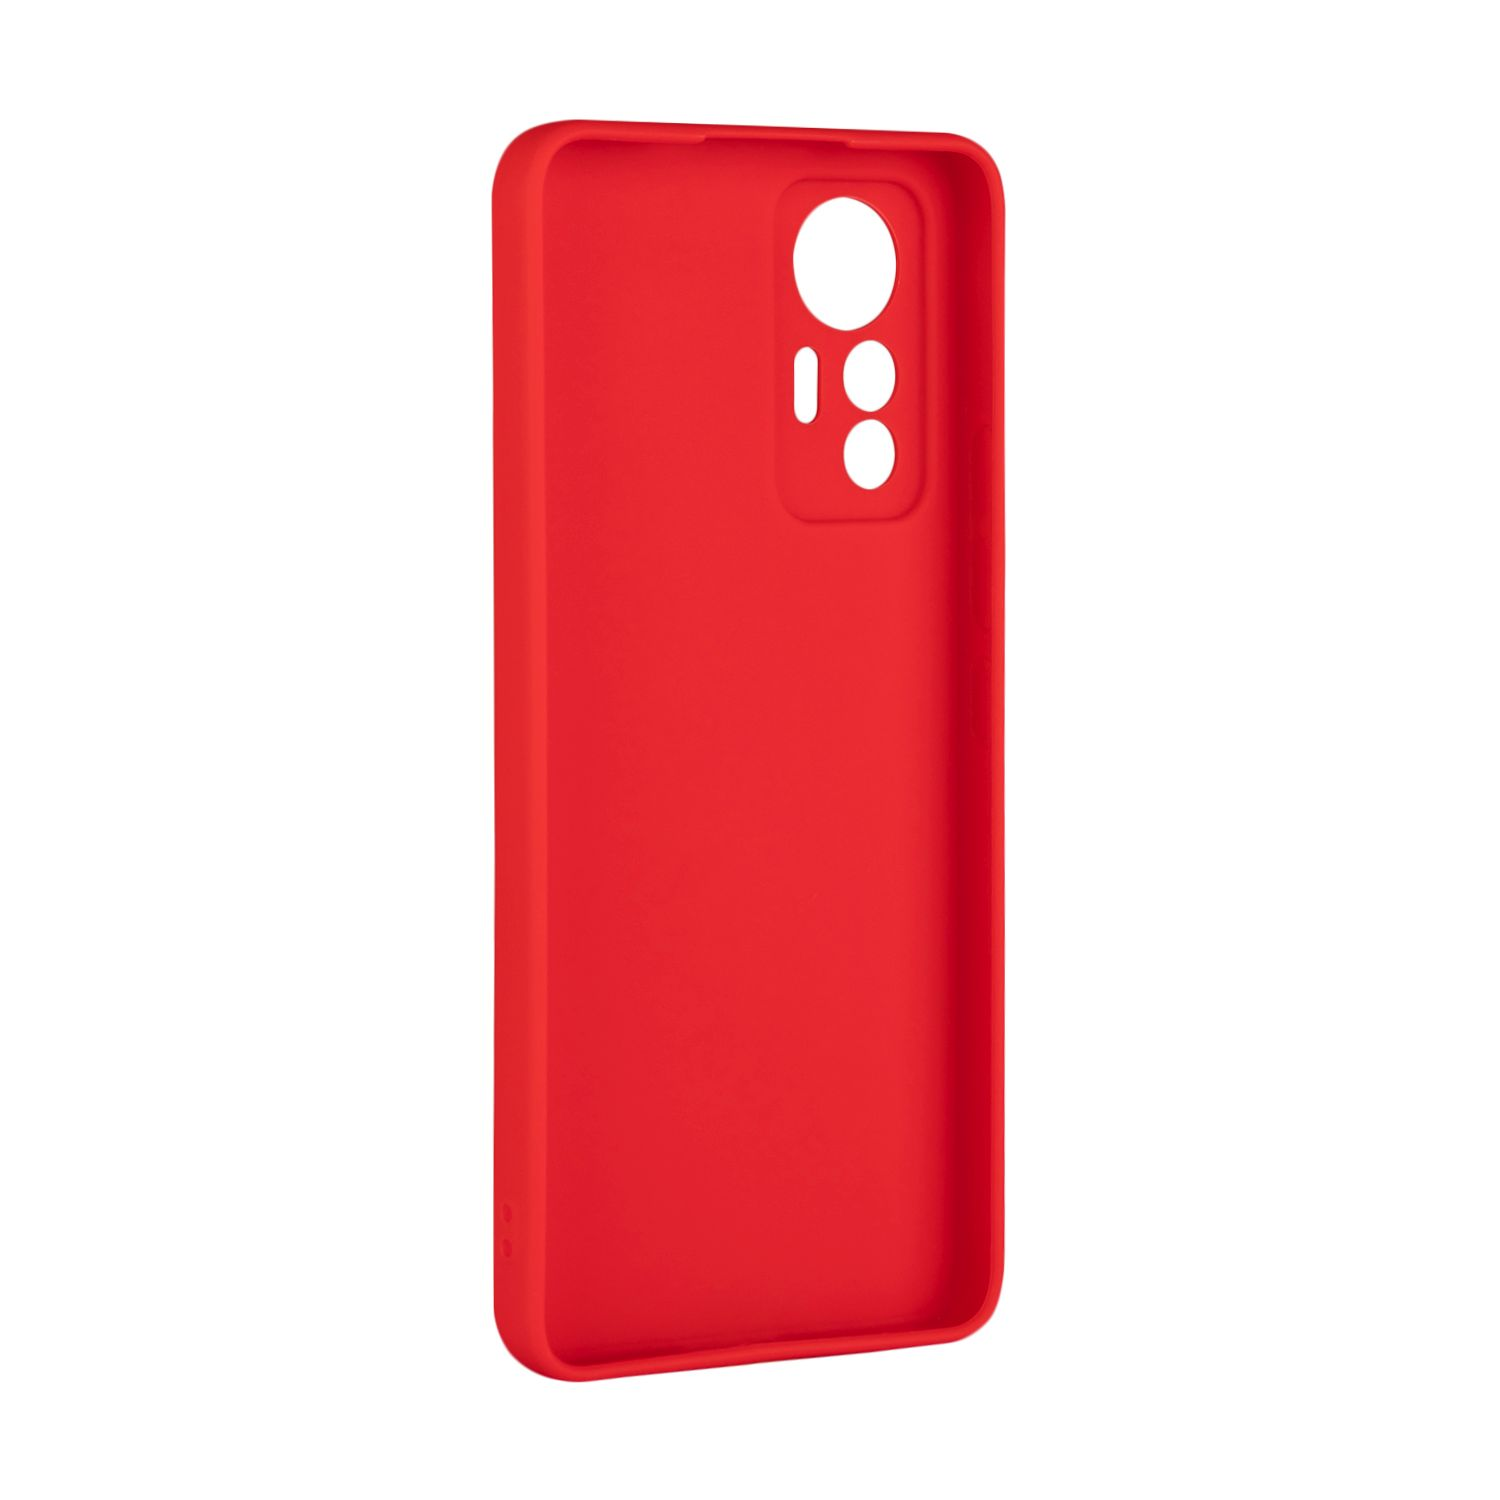 FIXED FIXST-948-RD, Full Rot Cover, 12 Xiaomi, Lite